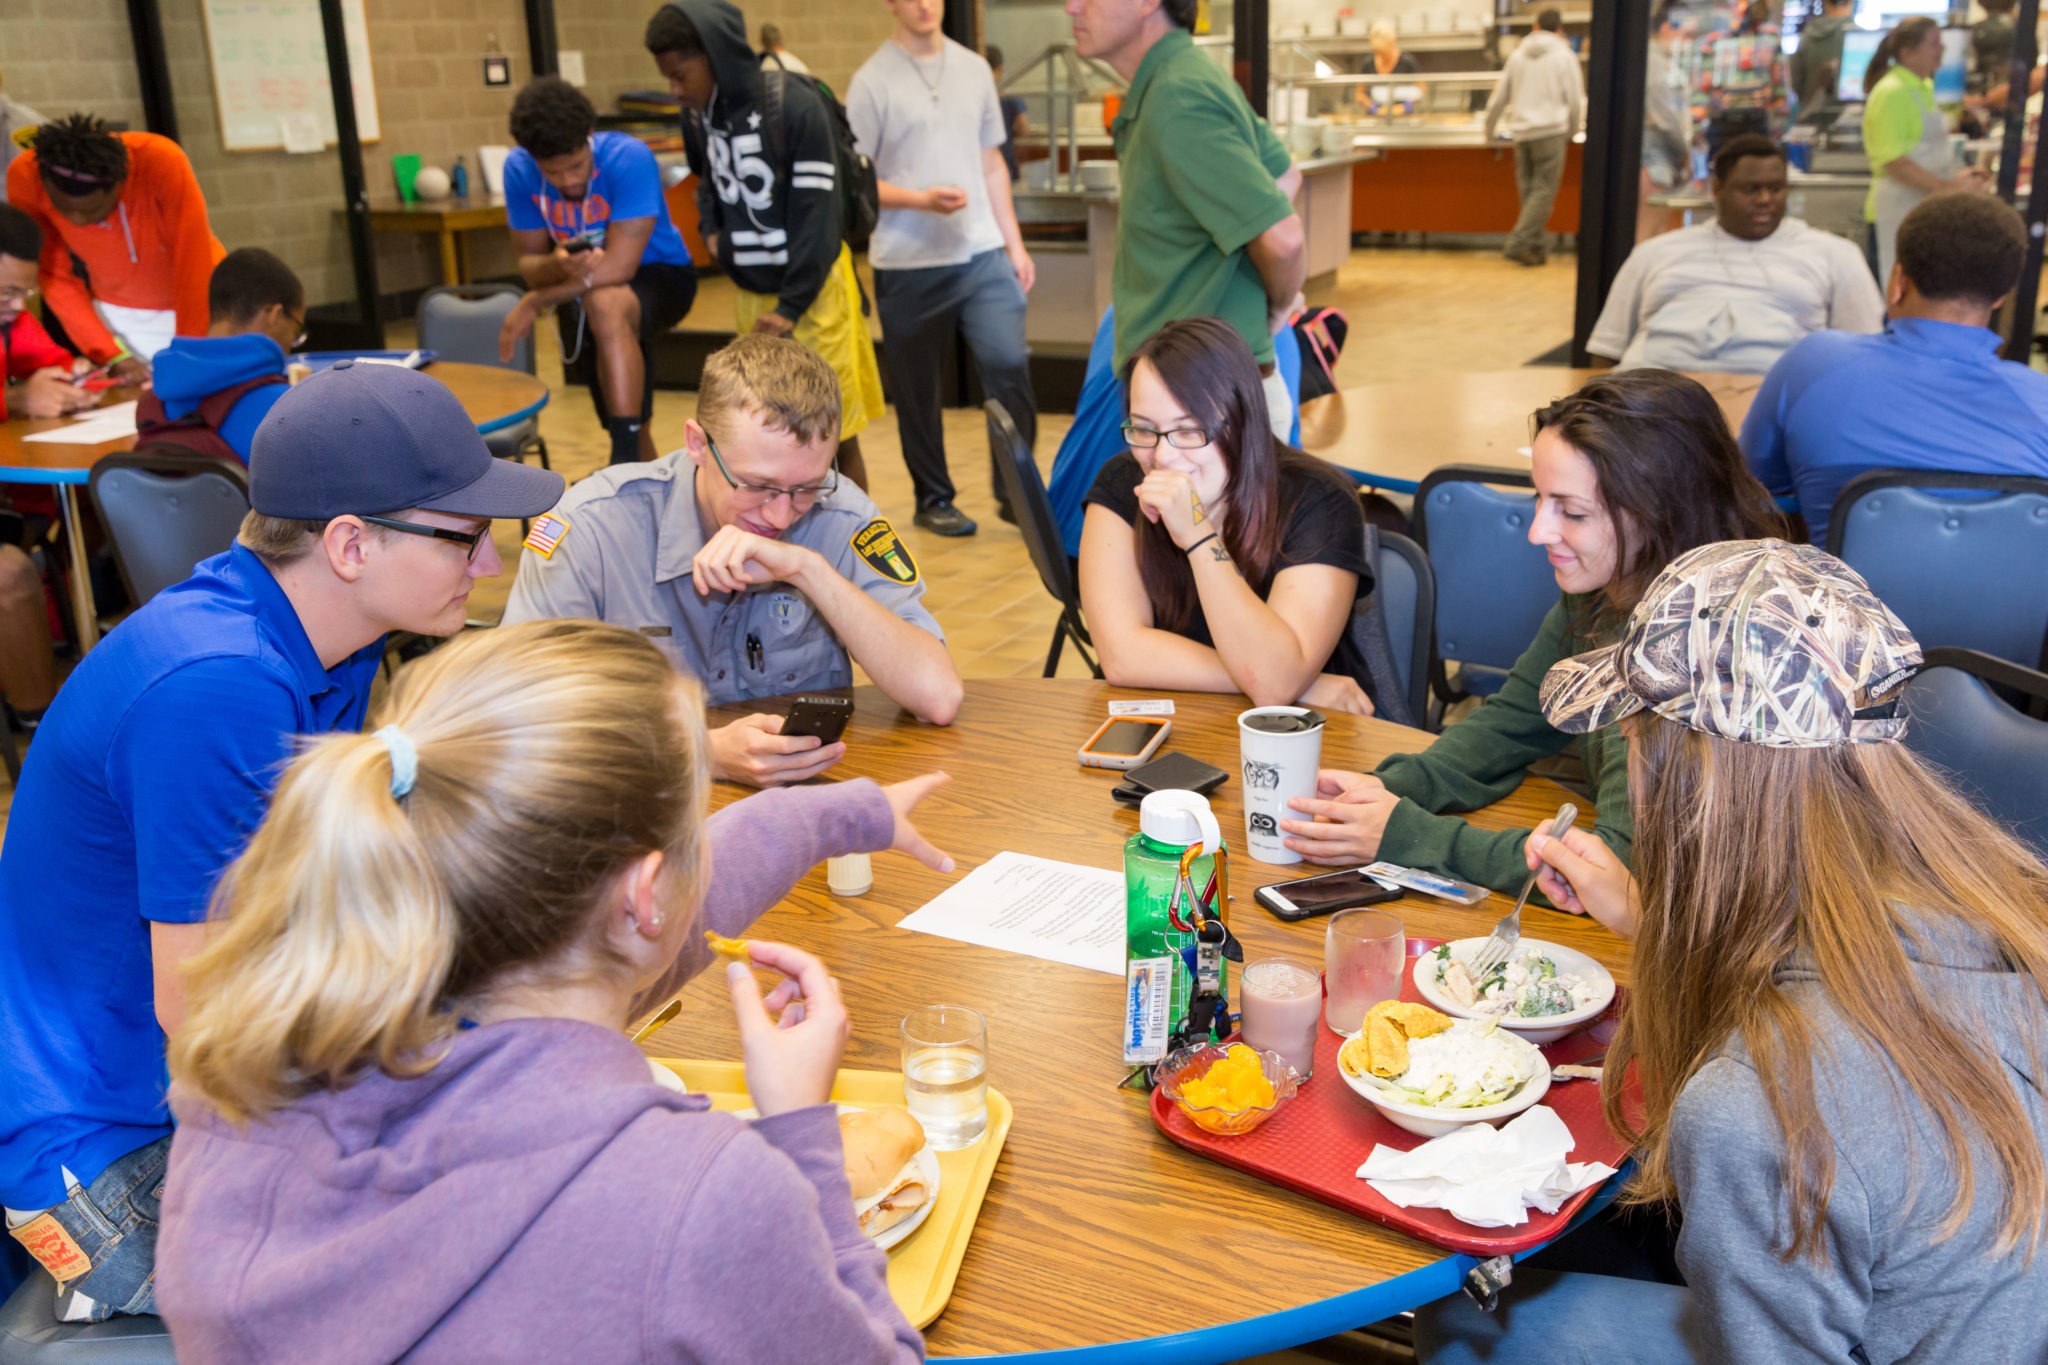 Students eating at the VCC cafeteria